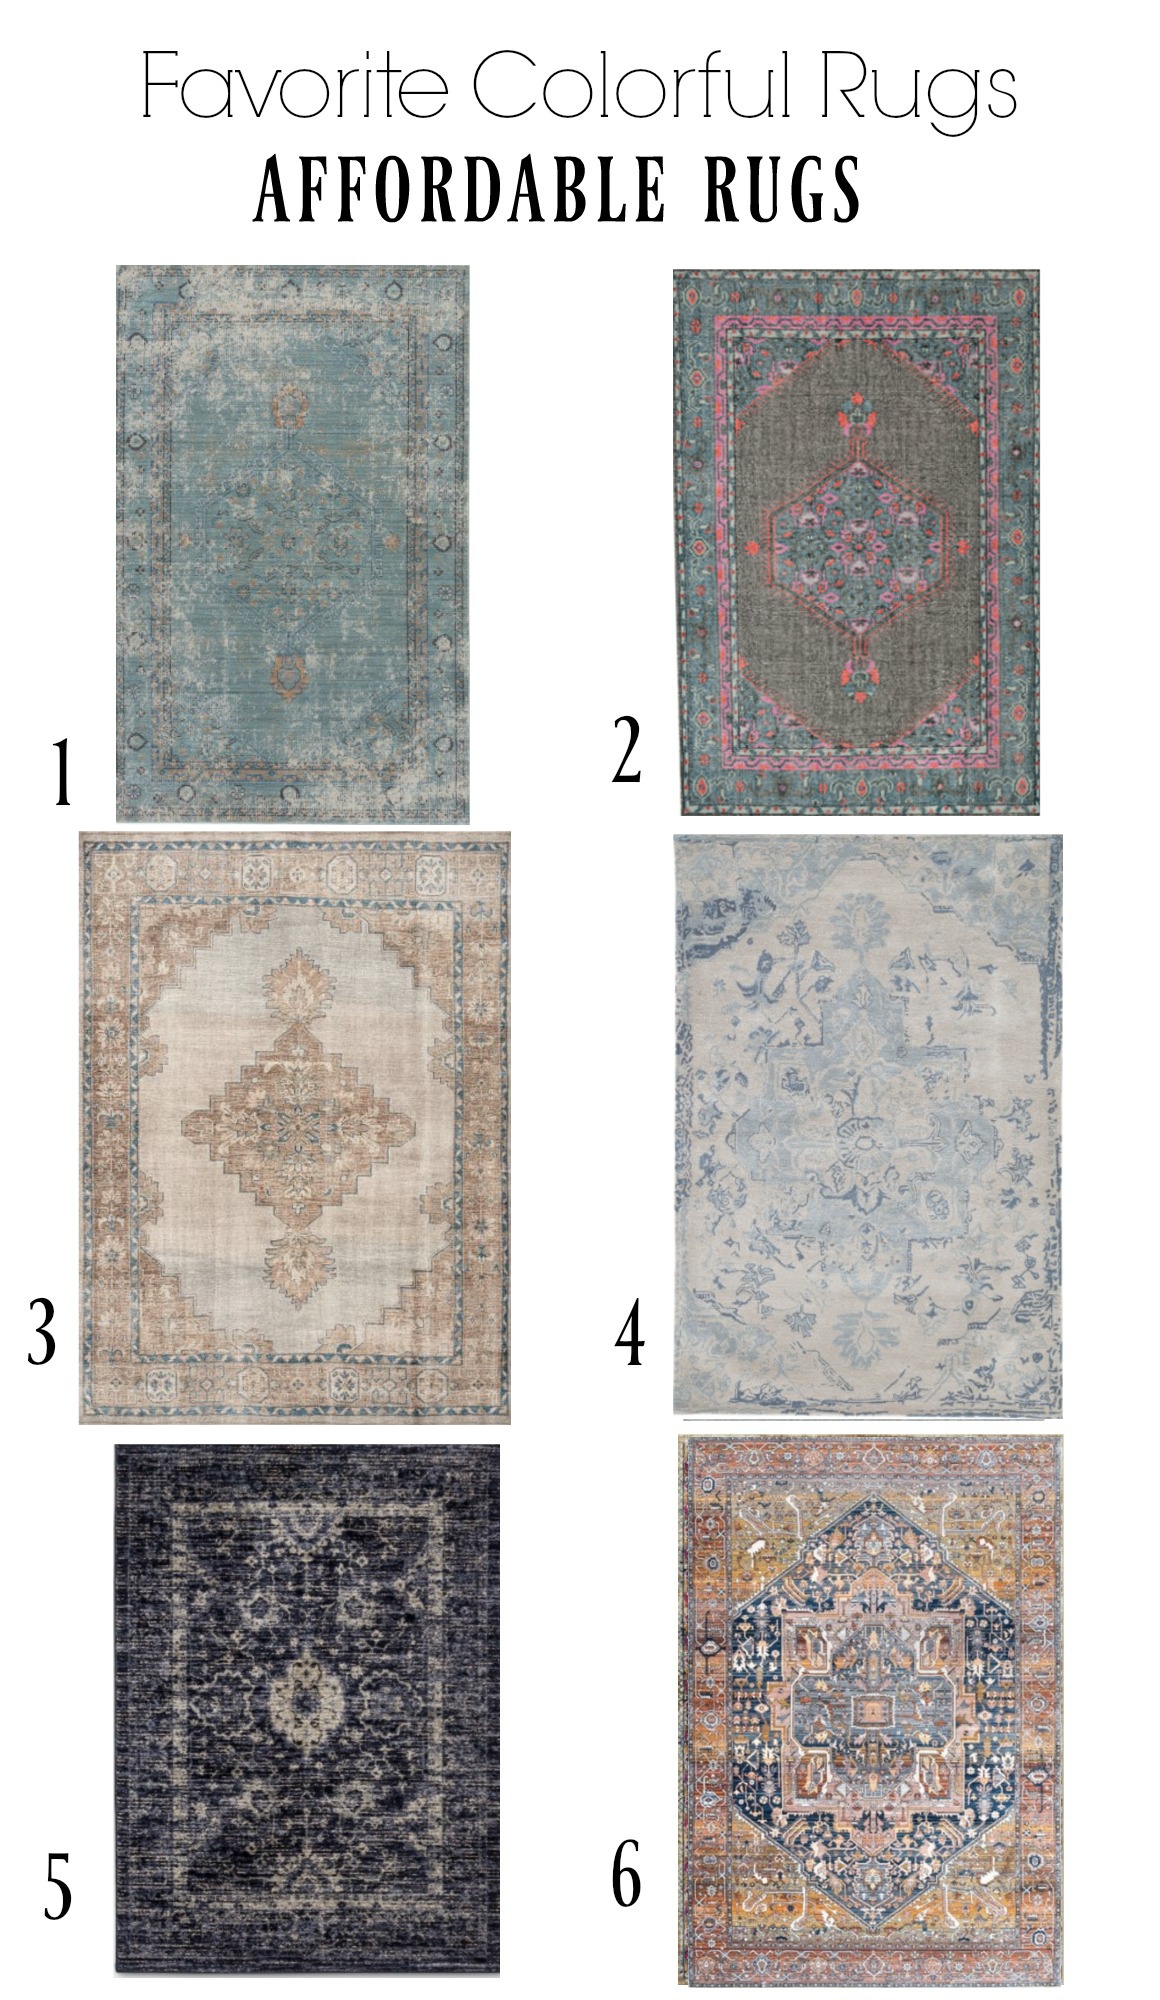 Affordable Colorful Rugs- Timeless Rugs